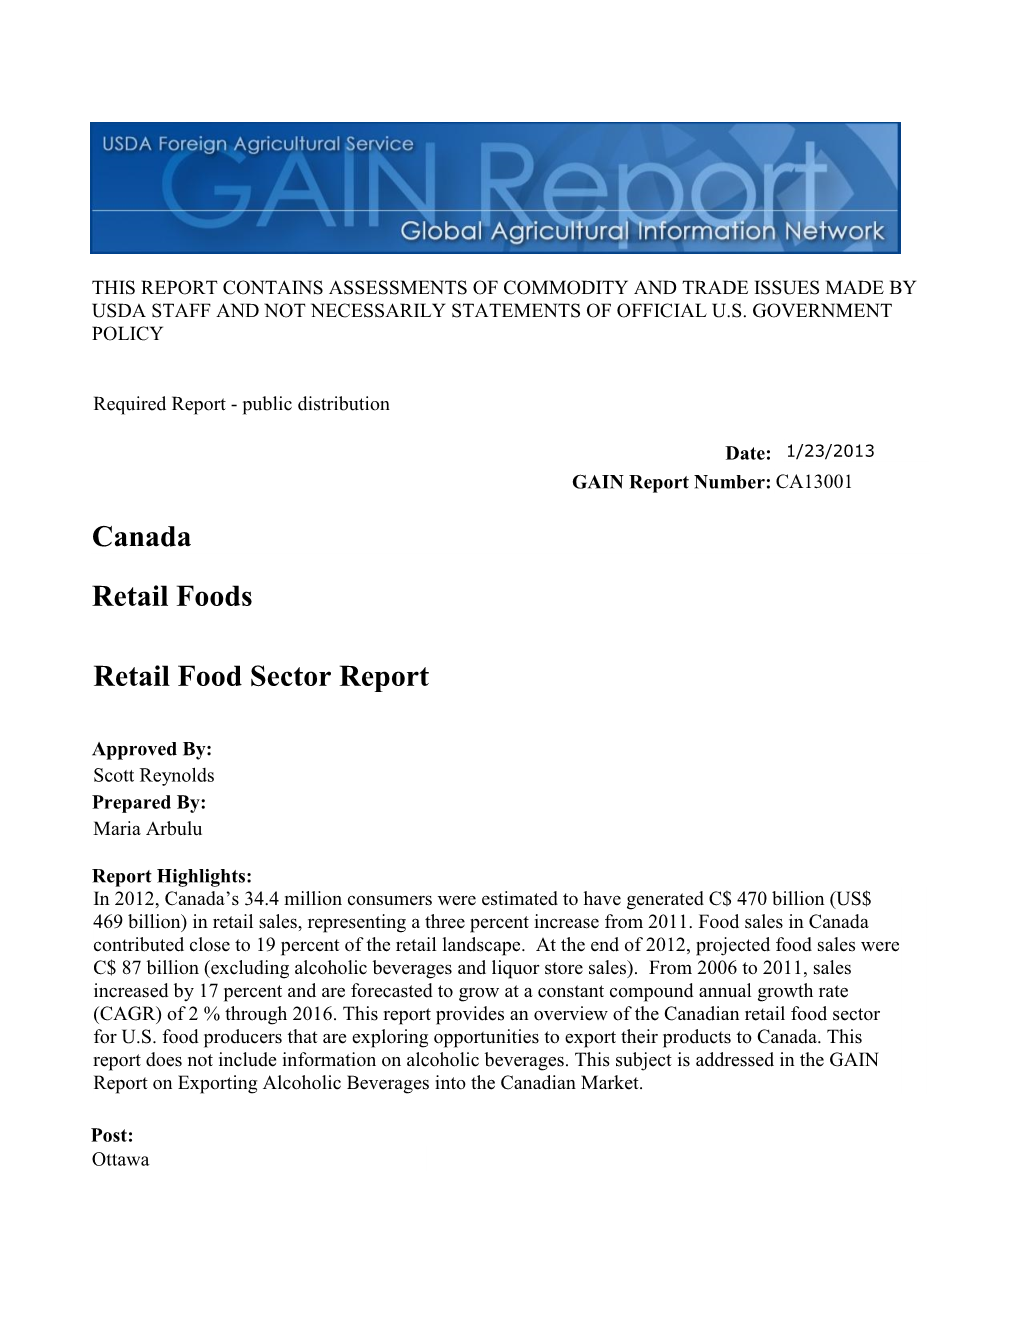 Retail Food Sector Report Retail Foods Canada